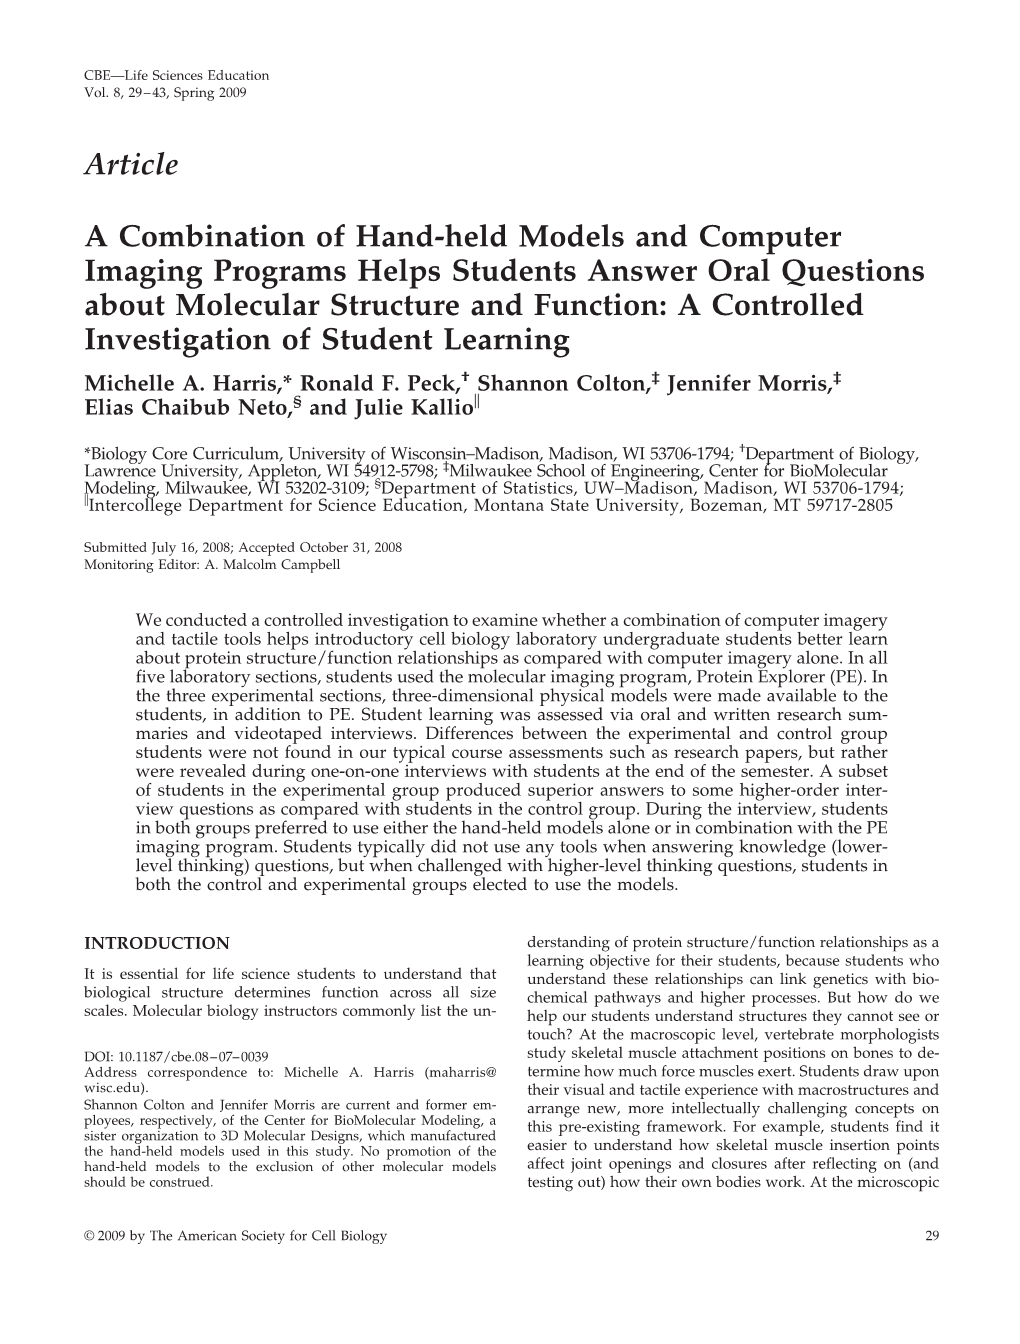 Article a Combination of Hand-Held Models and Computer Imaging